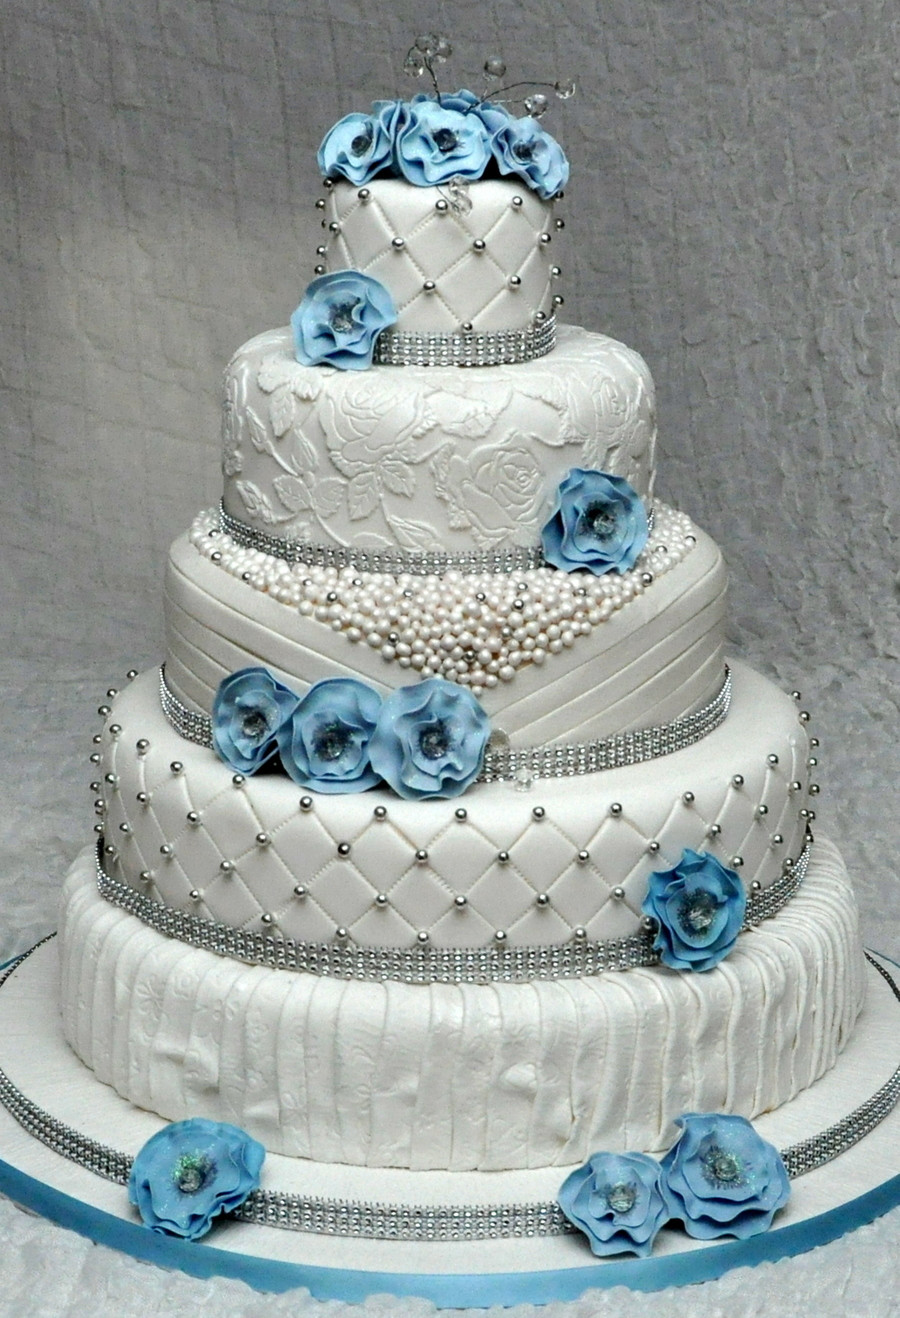 Wedding Tier Cakes
 5 Tier Wedding Cake With Edible Pearls And Lace Decorated